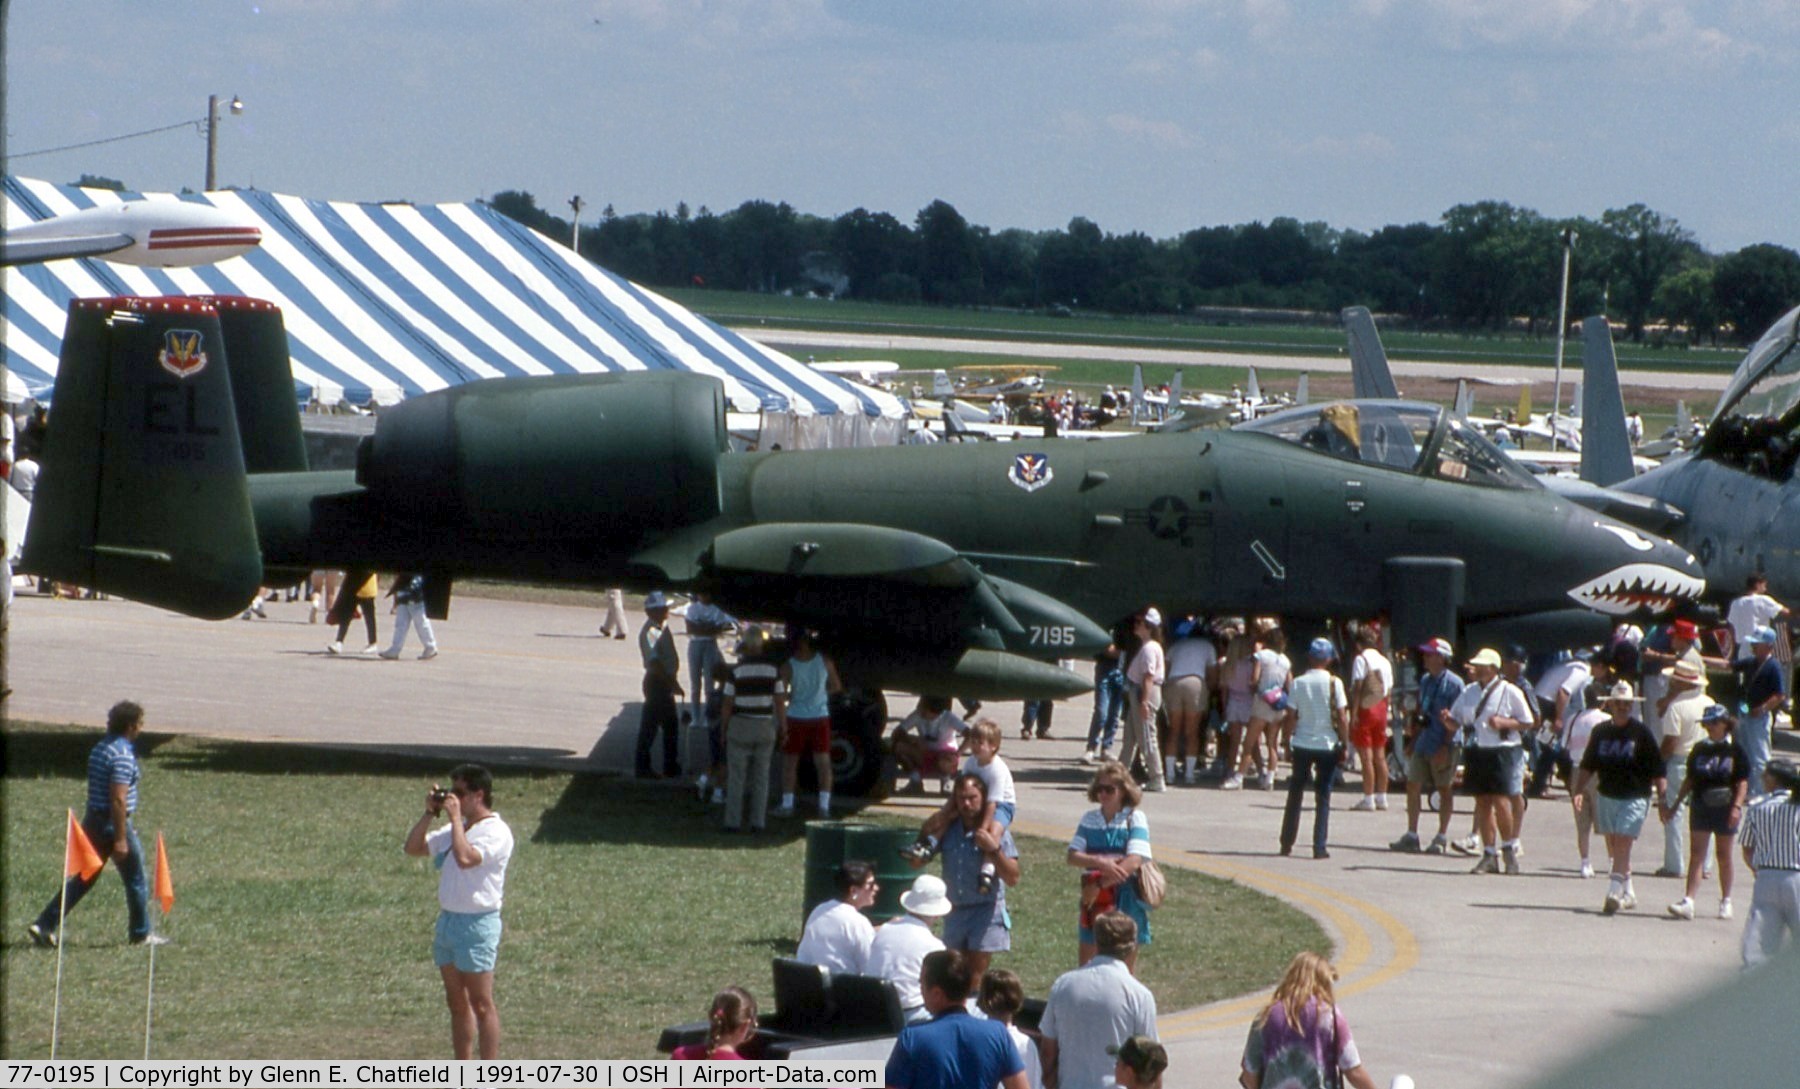 77-0195, 1977 Fairchild Republic A-10A Thunderbolt II C/N A10-0120, A-10A seeN from the cockpit of a DC3 at the EAA fly in